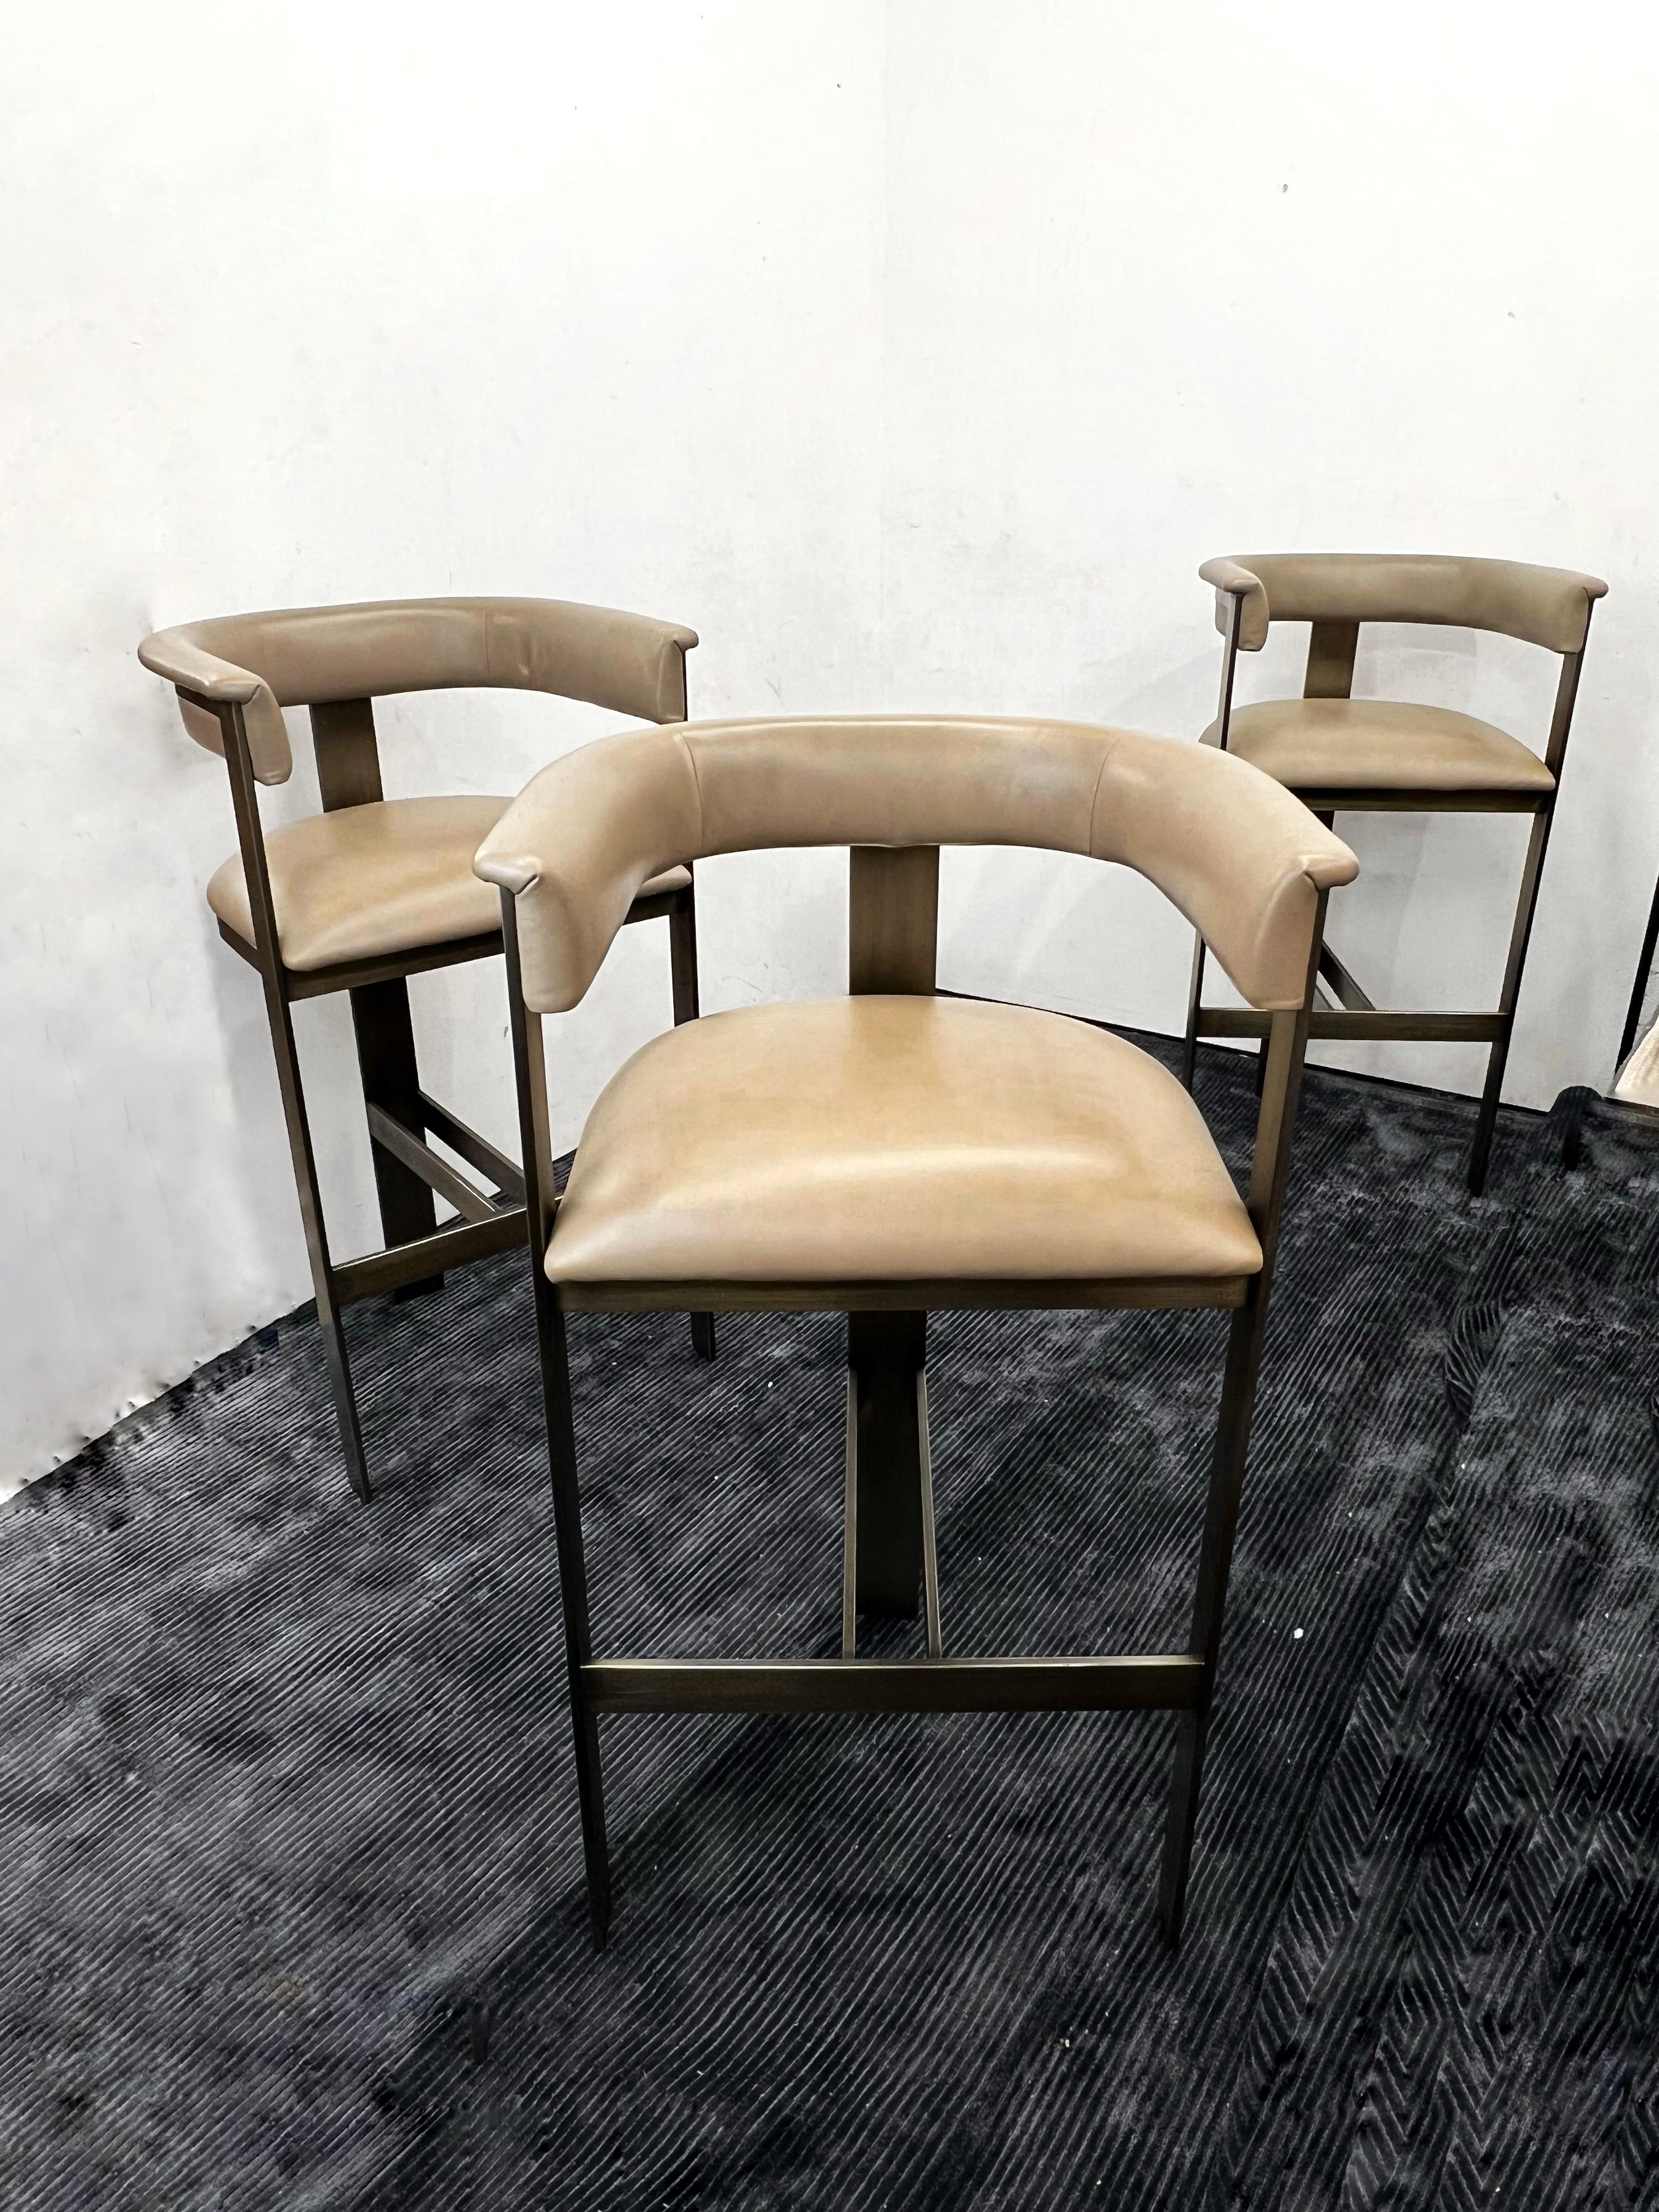 Retailed for $3,450+ Each 

In like new condition 

* Boasting an art moderne influence, the Darcy Bar Stool features a taupe leather seat and a streamlined stainless steel frame in an antique bronze finish.
* Genuine leather is a natural